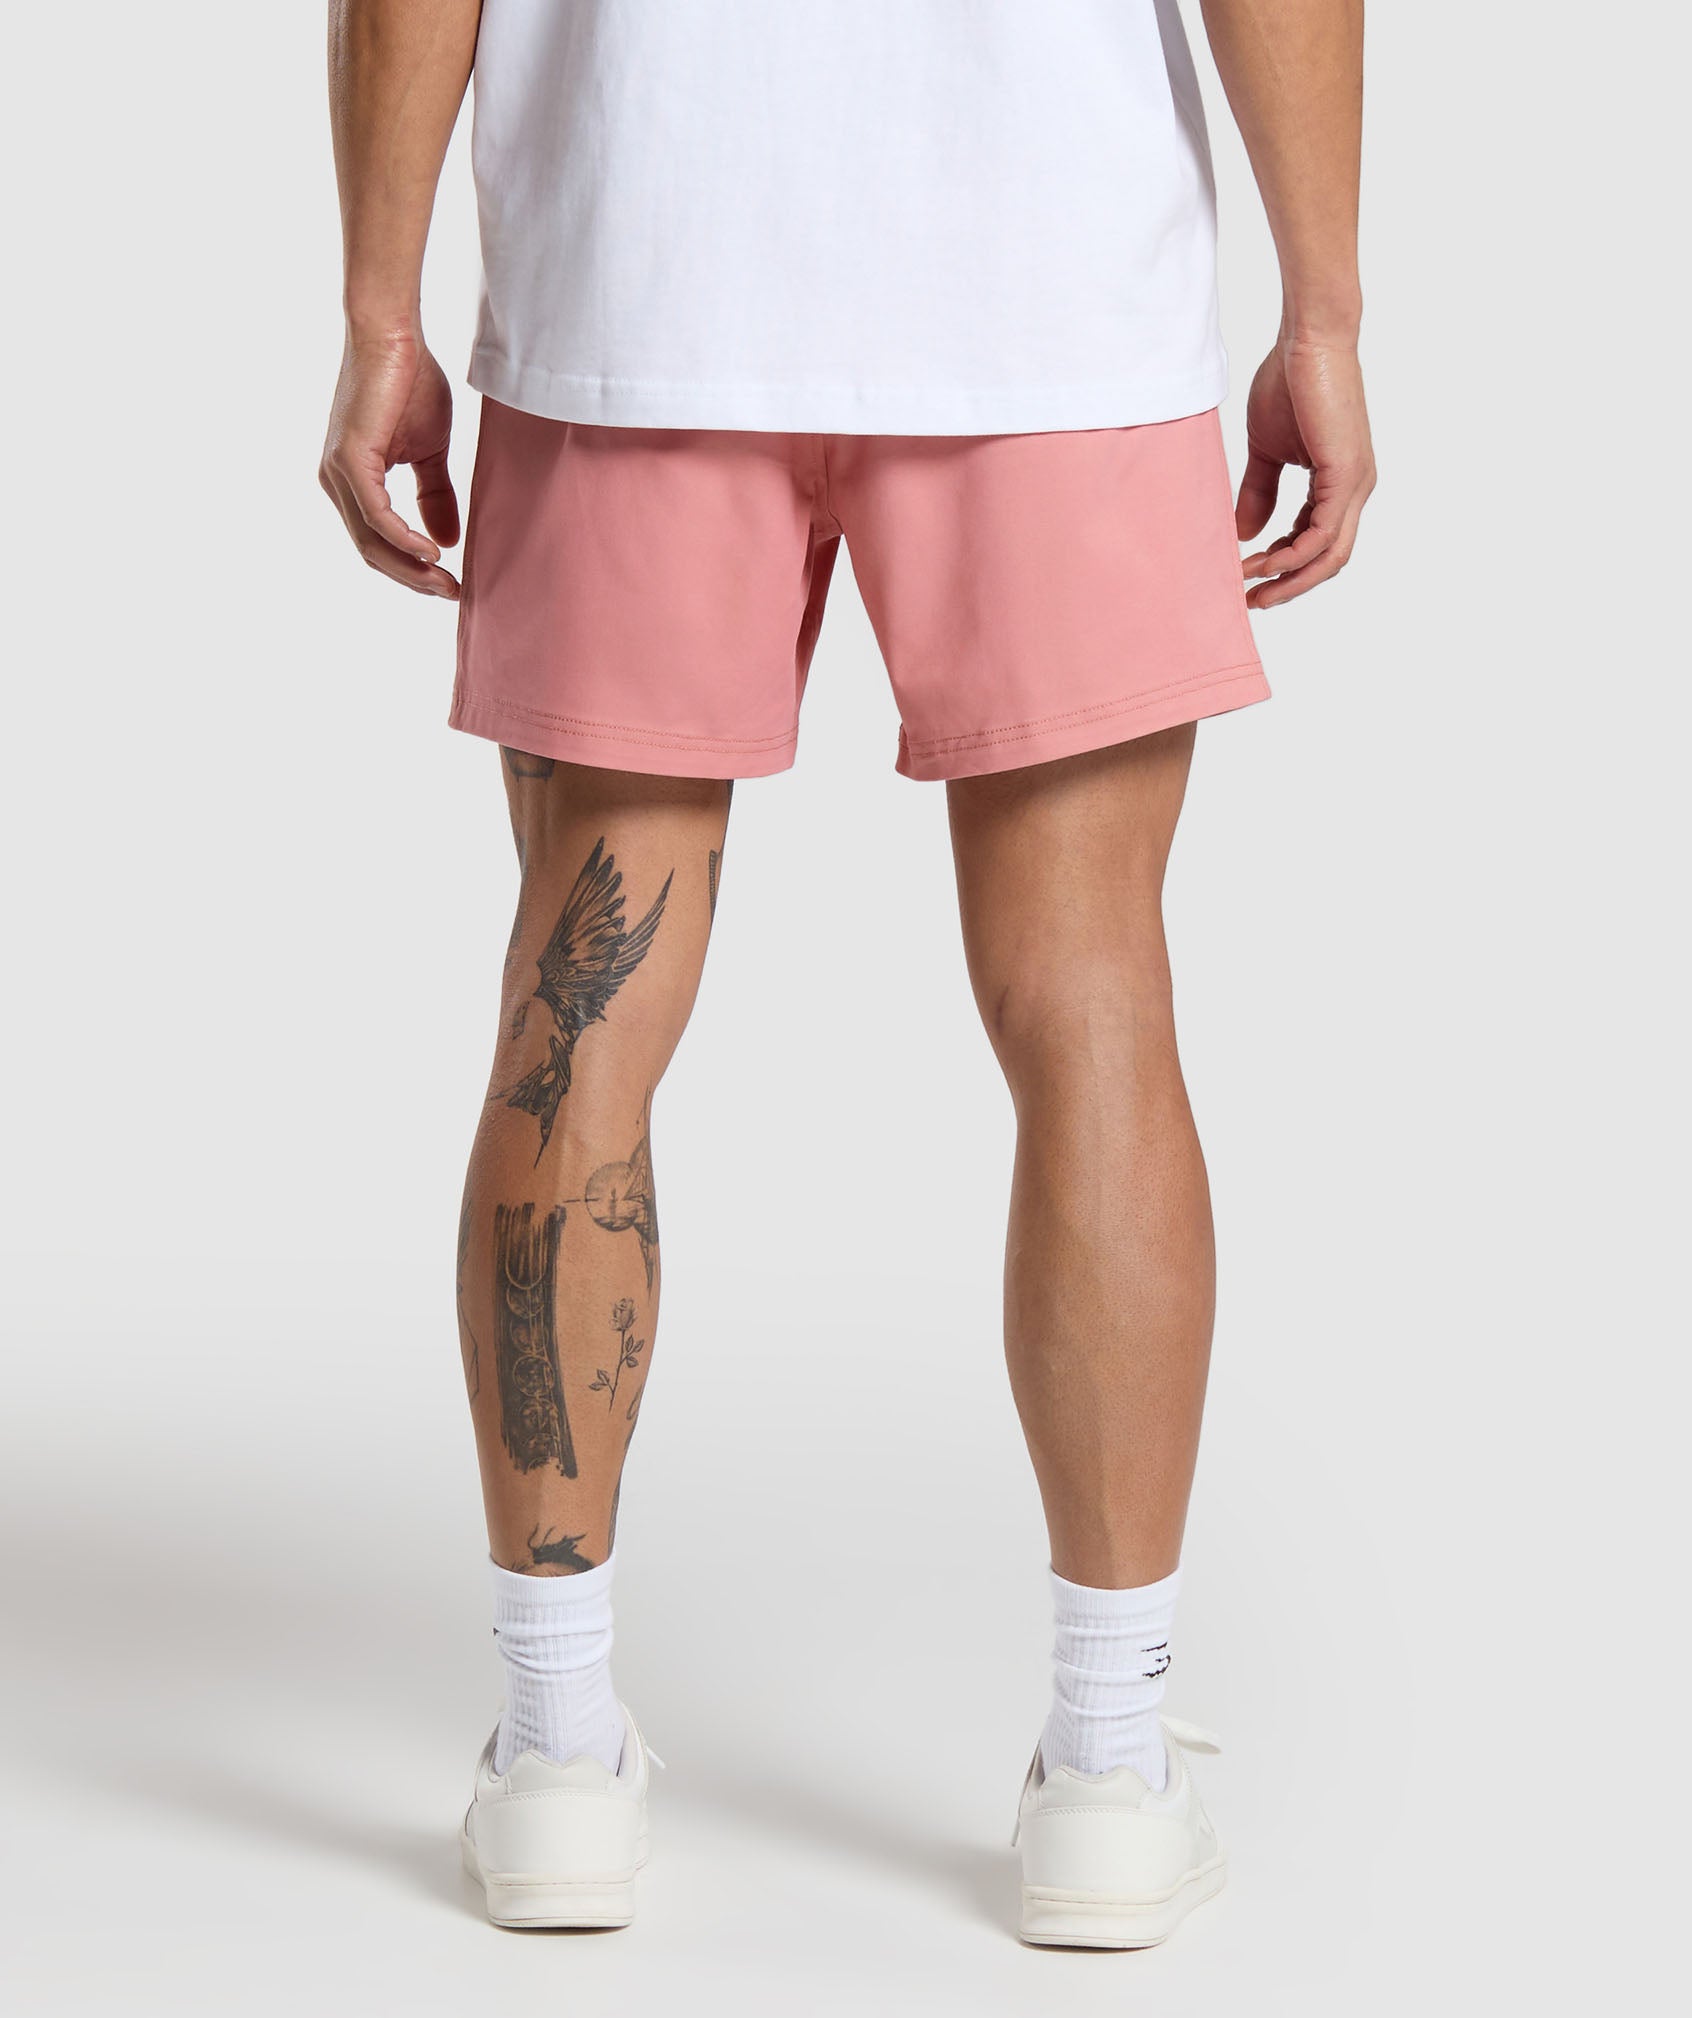 Rest Day Woven Shorts in Classic Pink - view 2